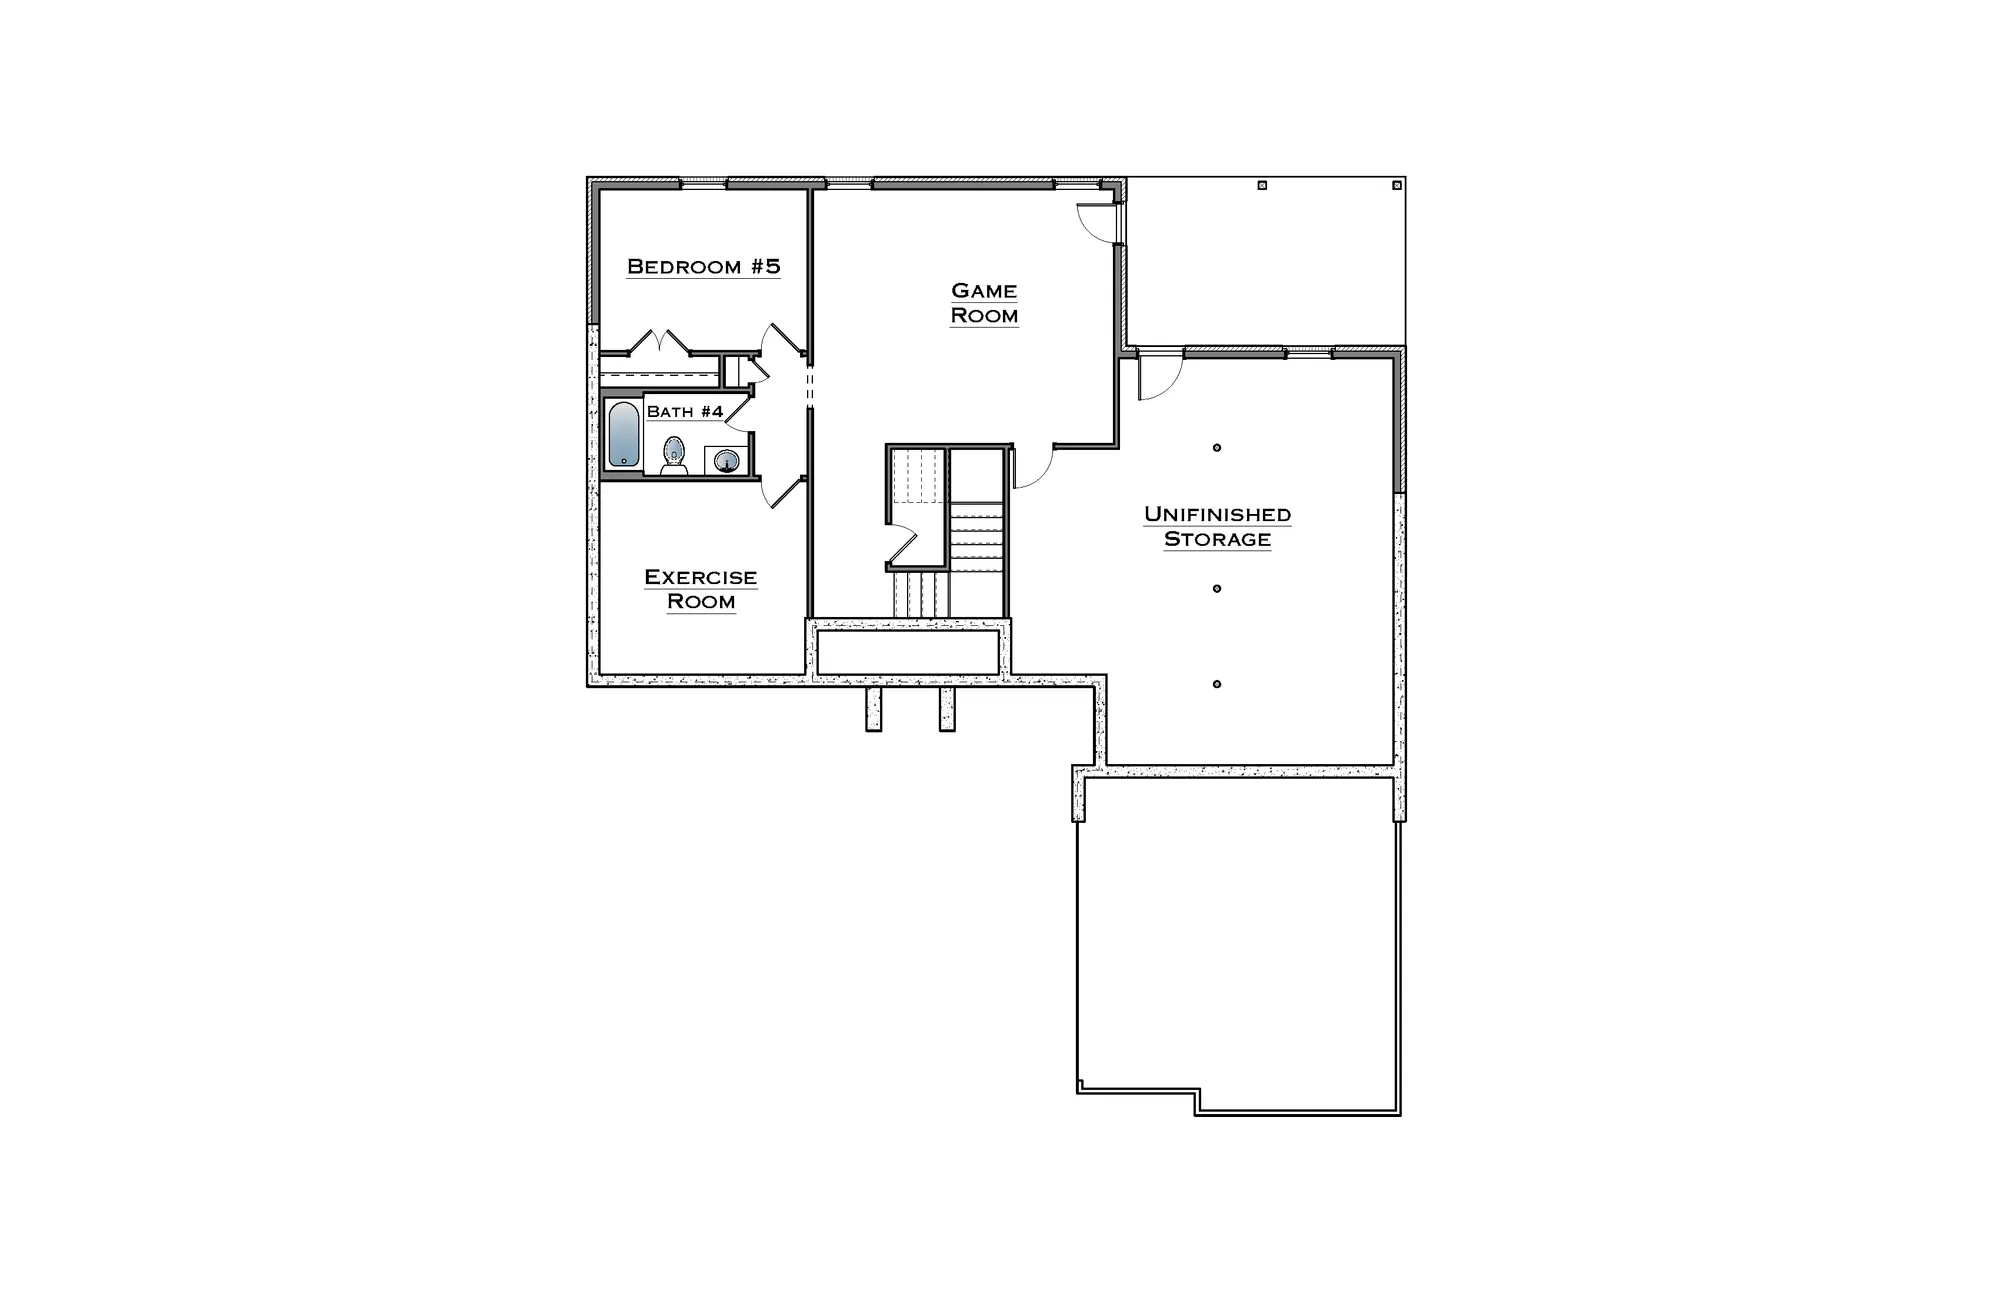 Finished Basement with Game Room, Exercise Room, Bedroom, Full Bath & Unfinished Storage - undefined